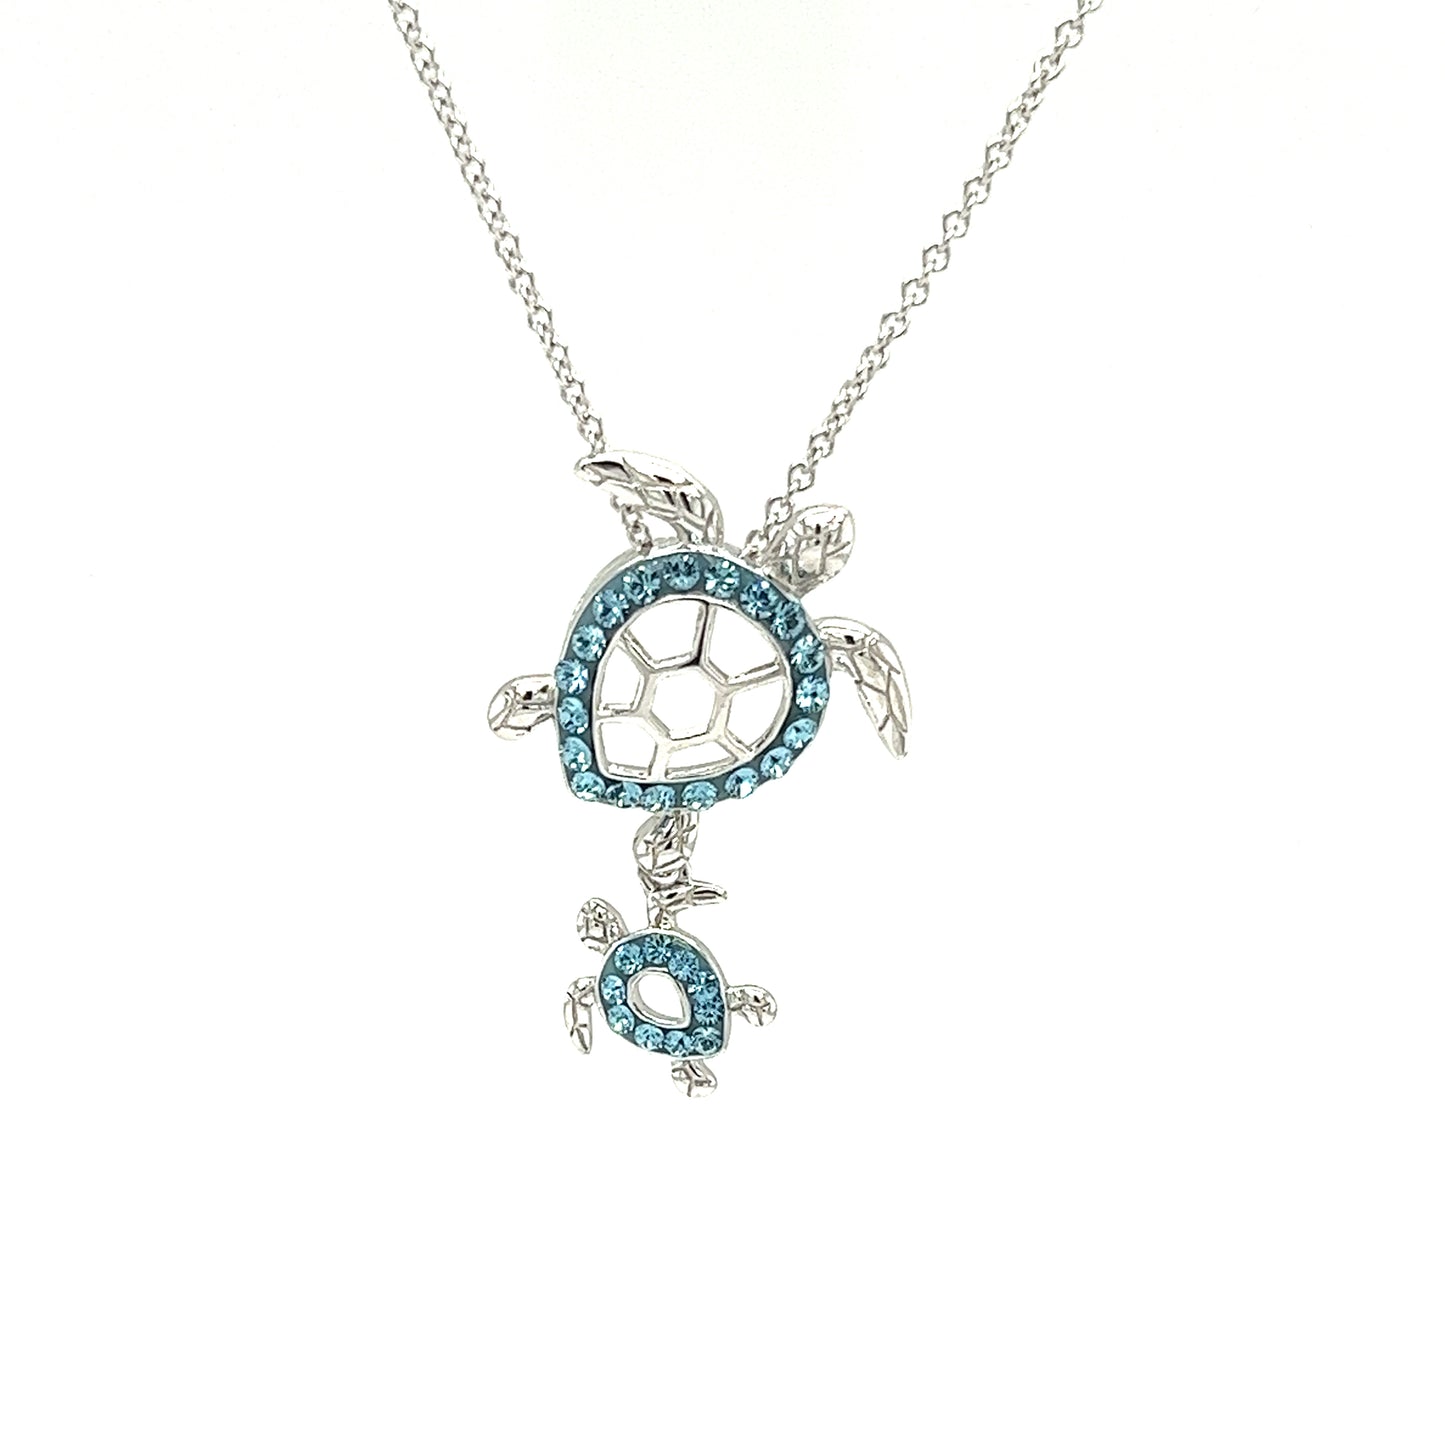 Mother and Baby Sea Turtle Necklace with Aqua Crystals in Sterling Silver Pendant Front View